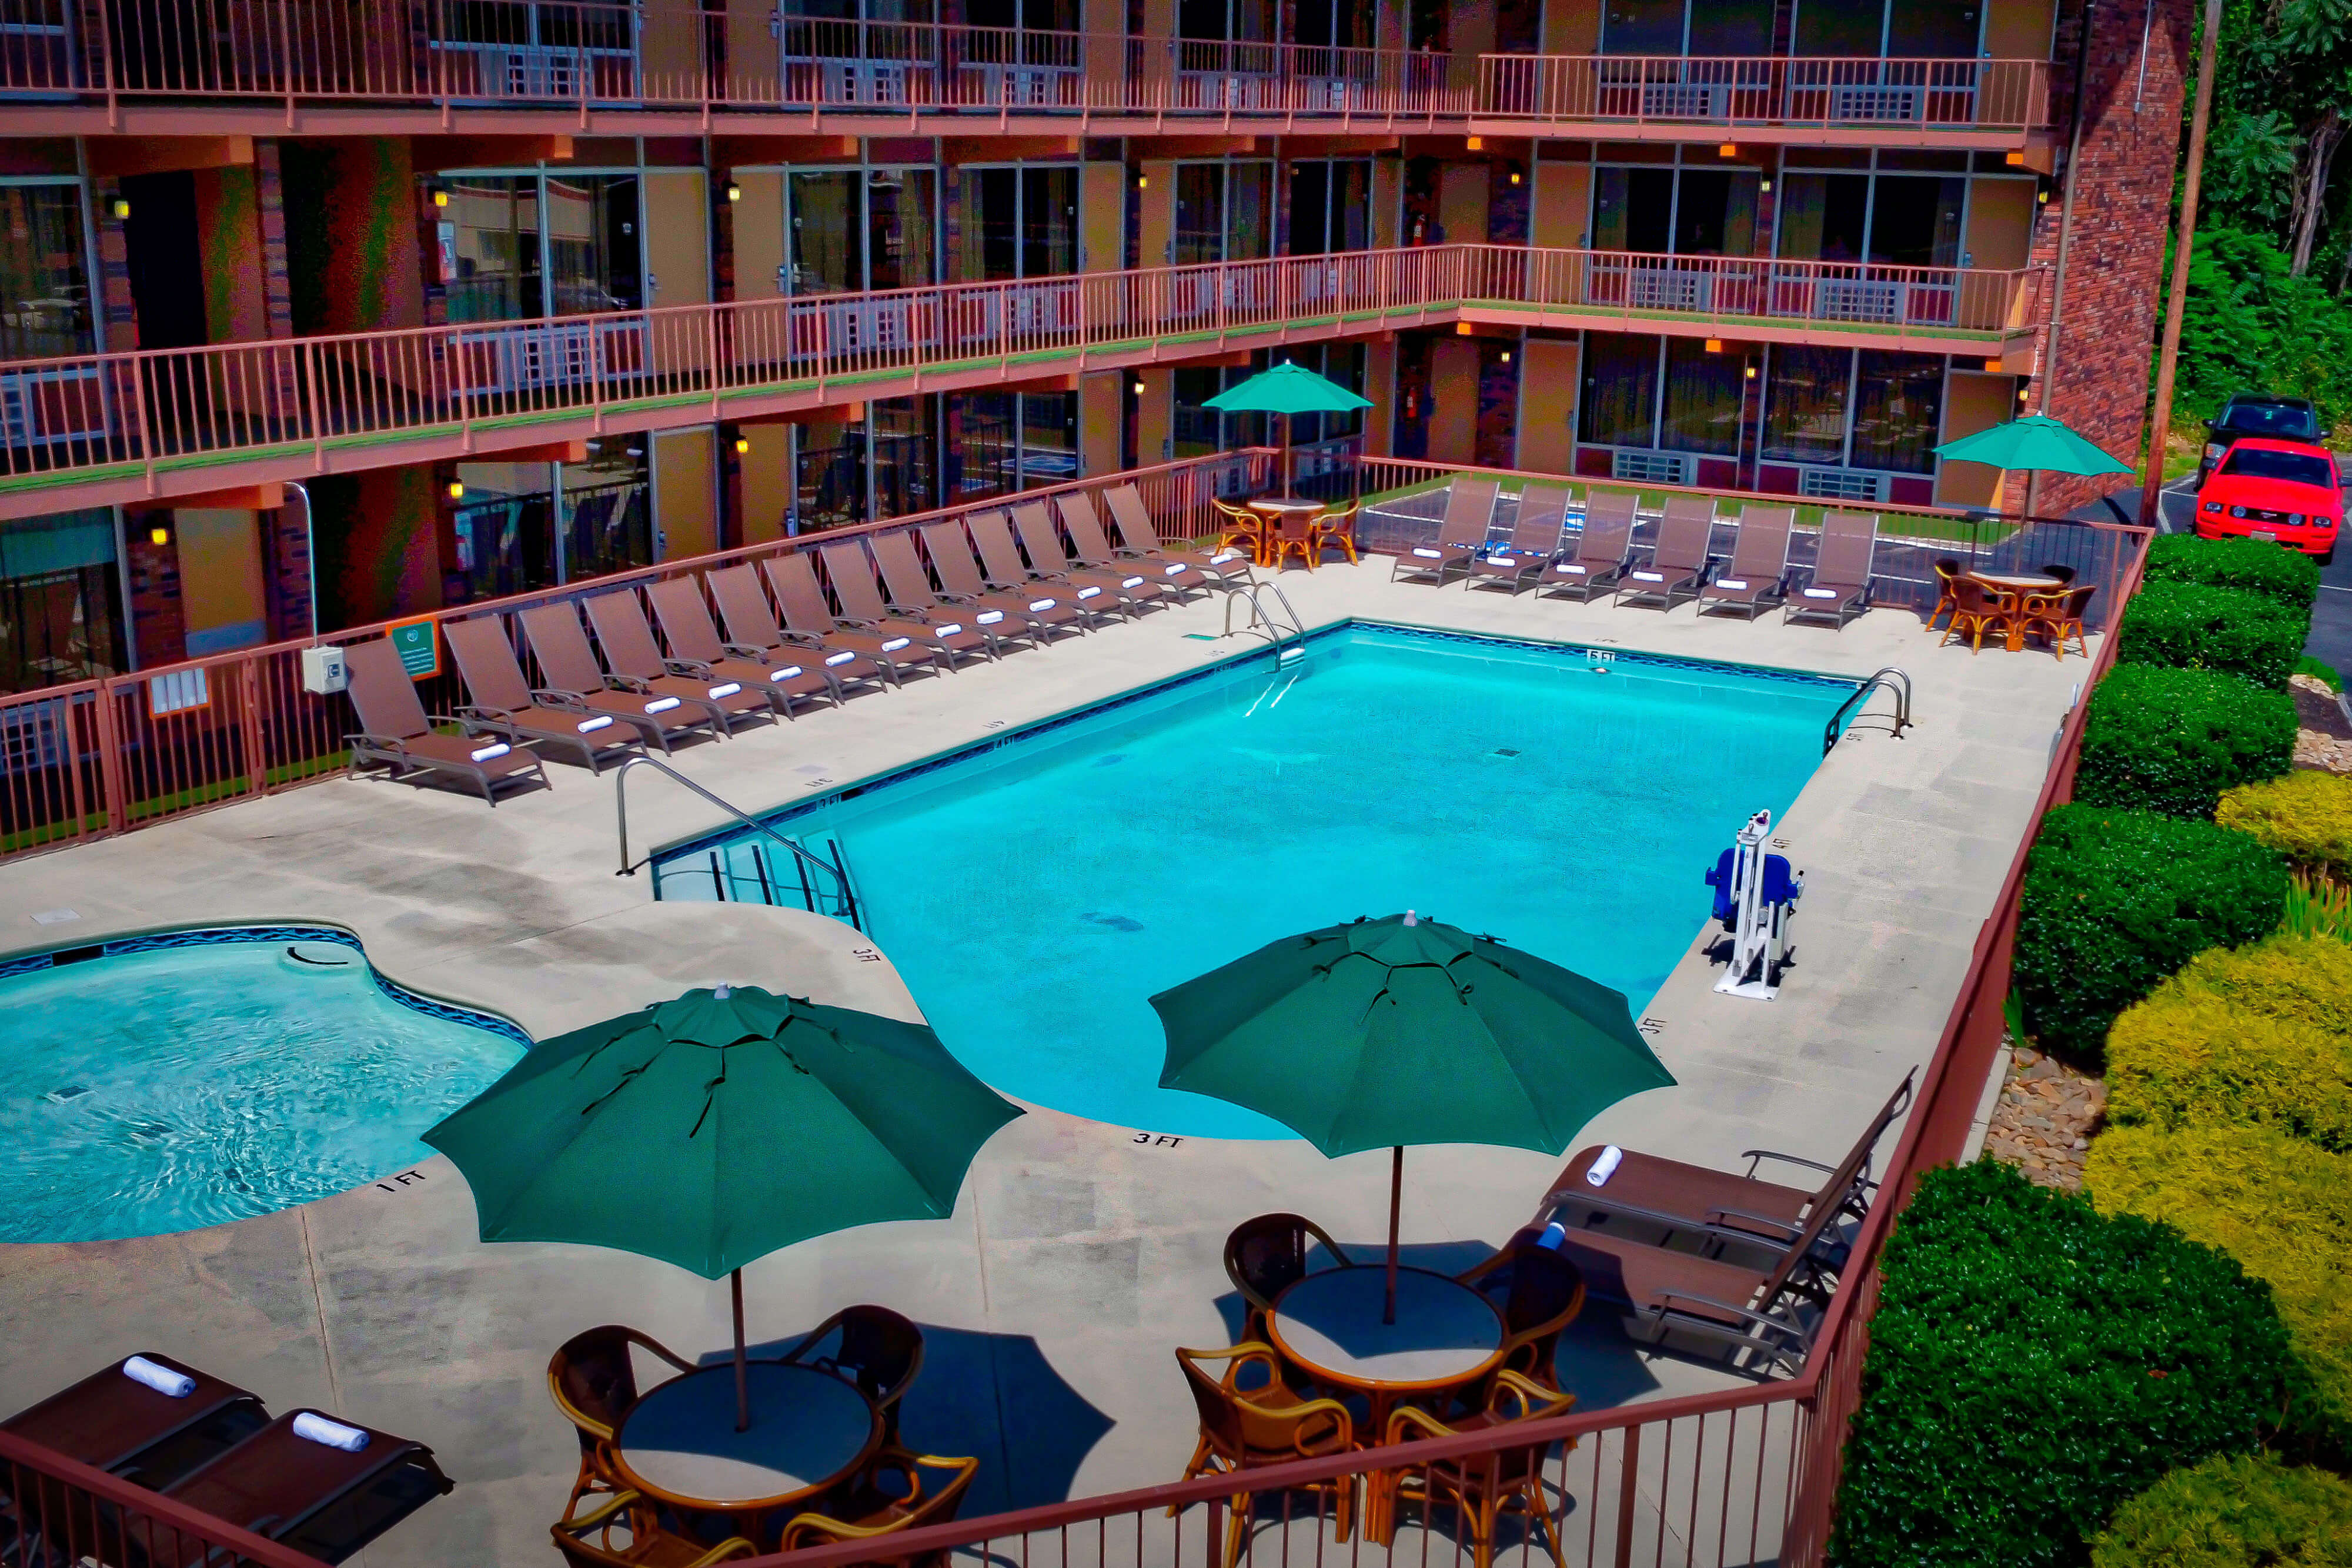 Outdoor pool and children's wading pool surrounded by lounge chairs | Wild Bear Inn | Westgate Pigeon Forge Resorts